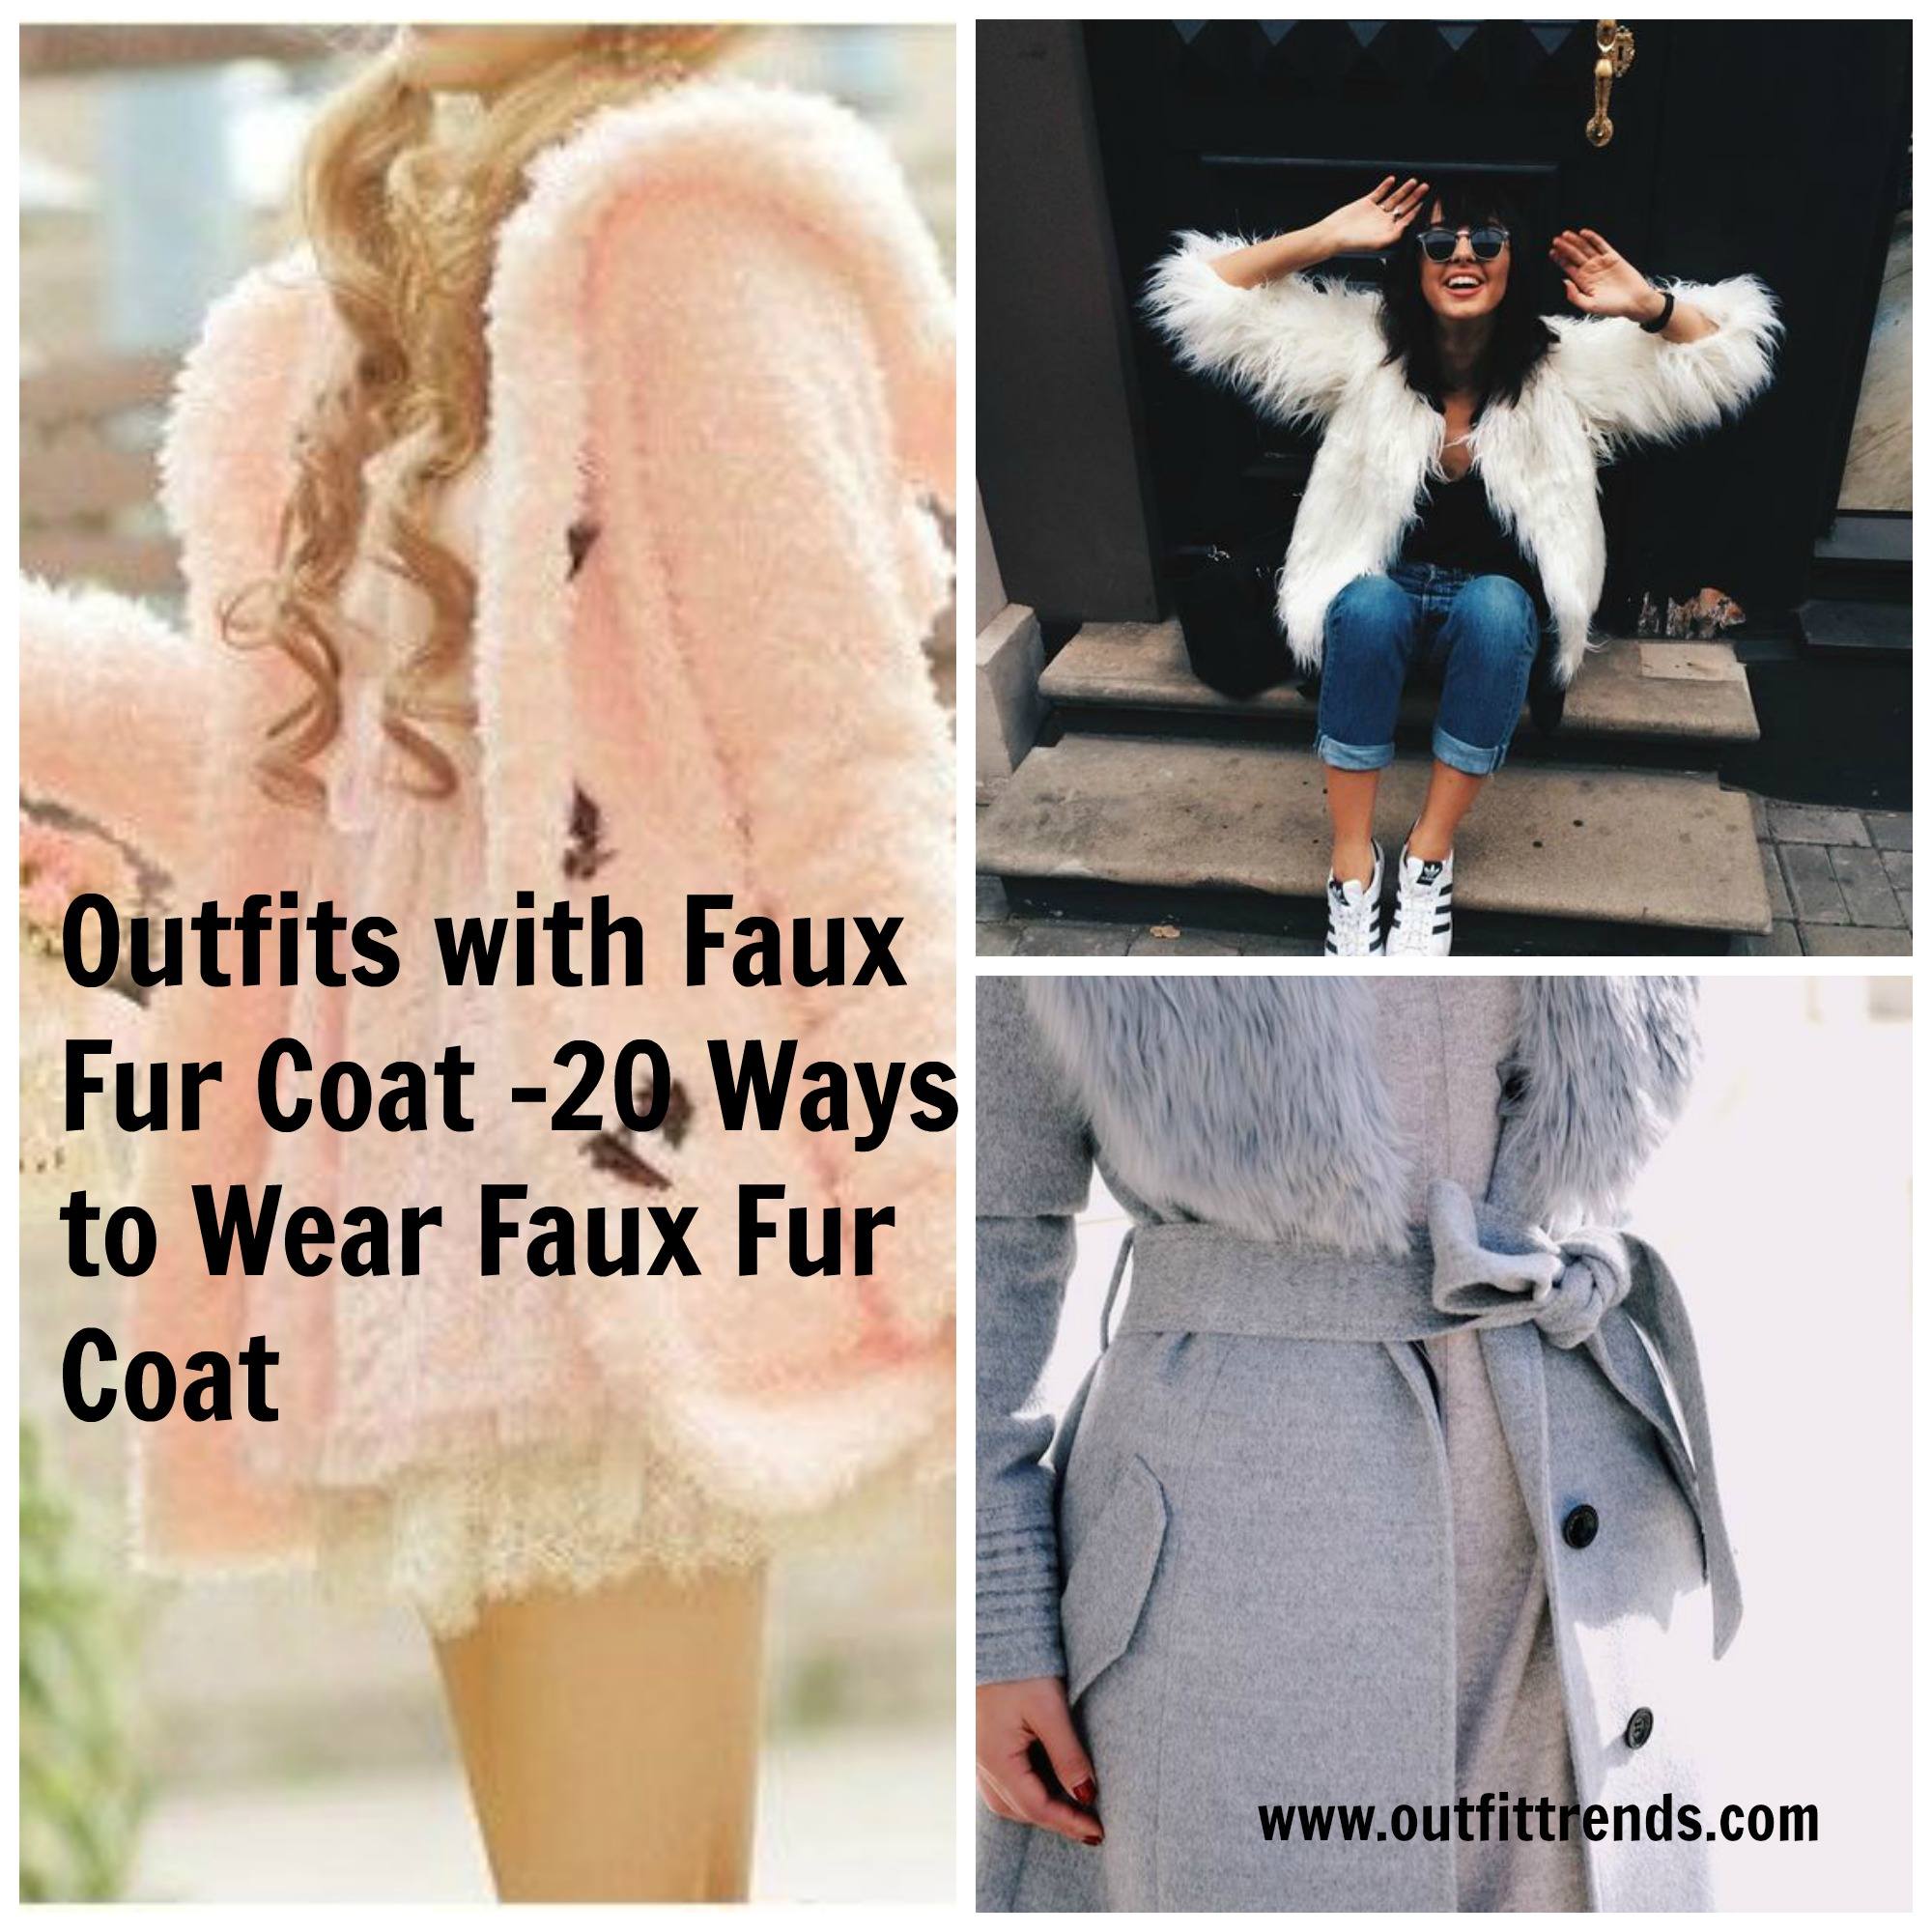 Outfits with Faux Fur Coat – 20 Ways to Wear Faux Fur Coat